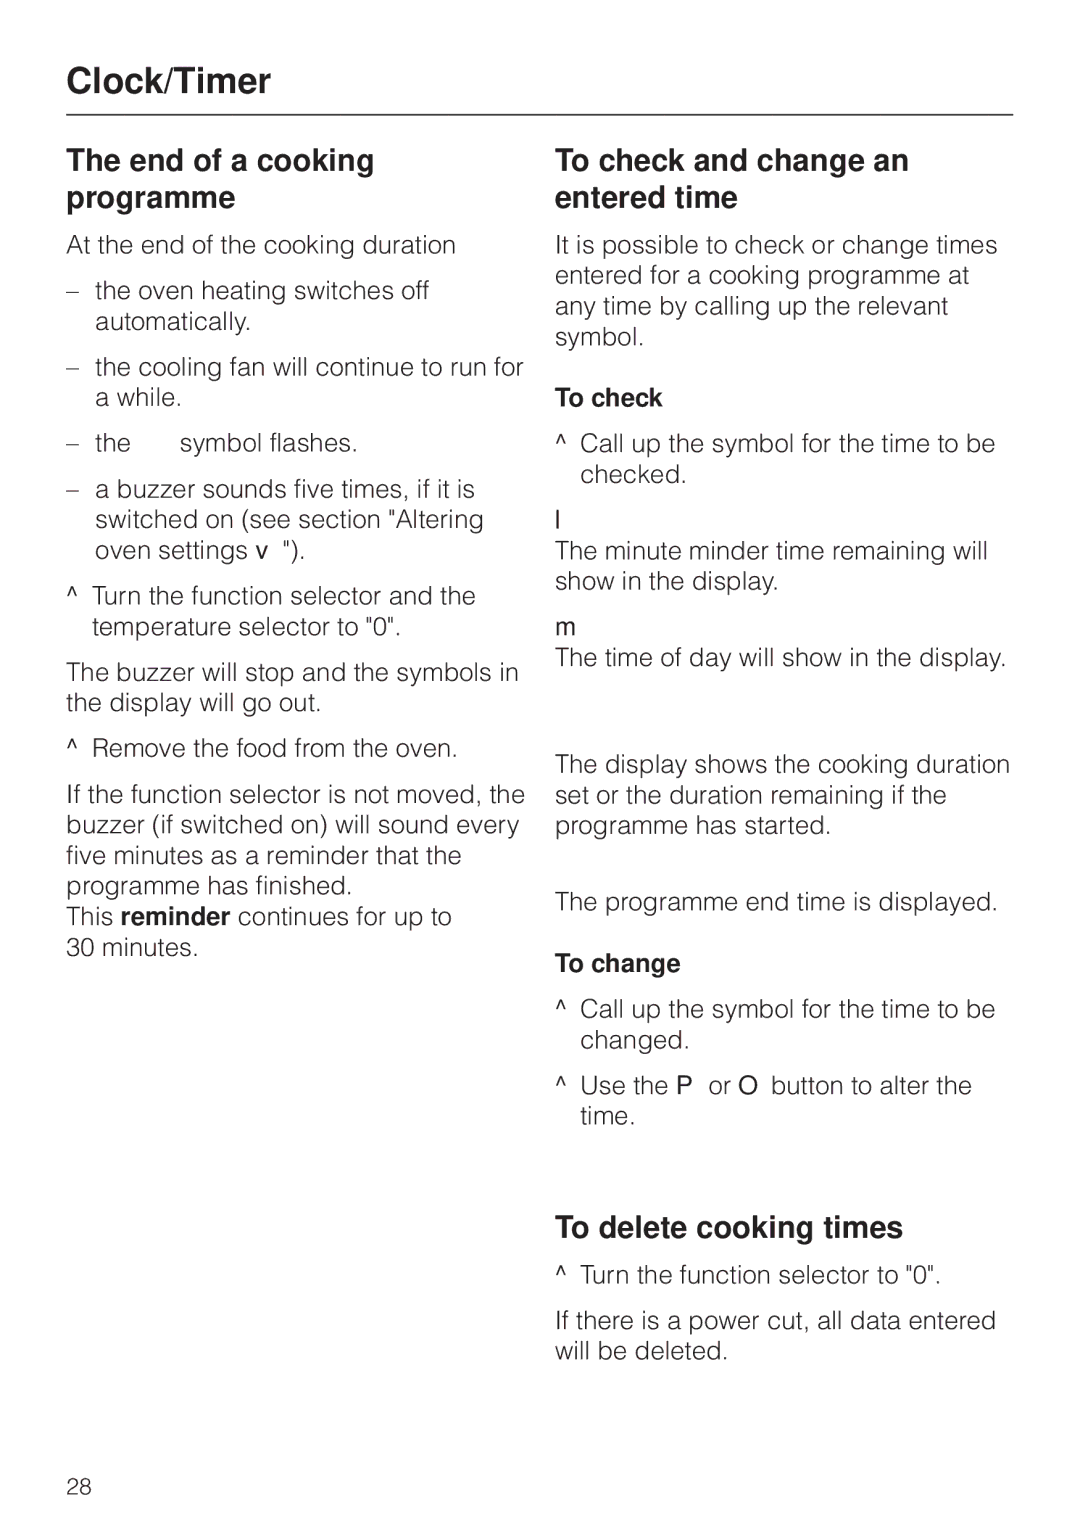 Miele H4270, H 4170 End of a cooking programme, To check and change an entered time, To delete cooking times, To change 